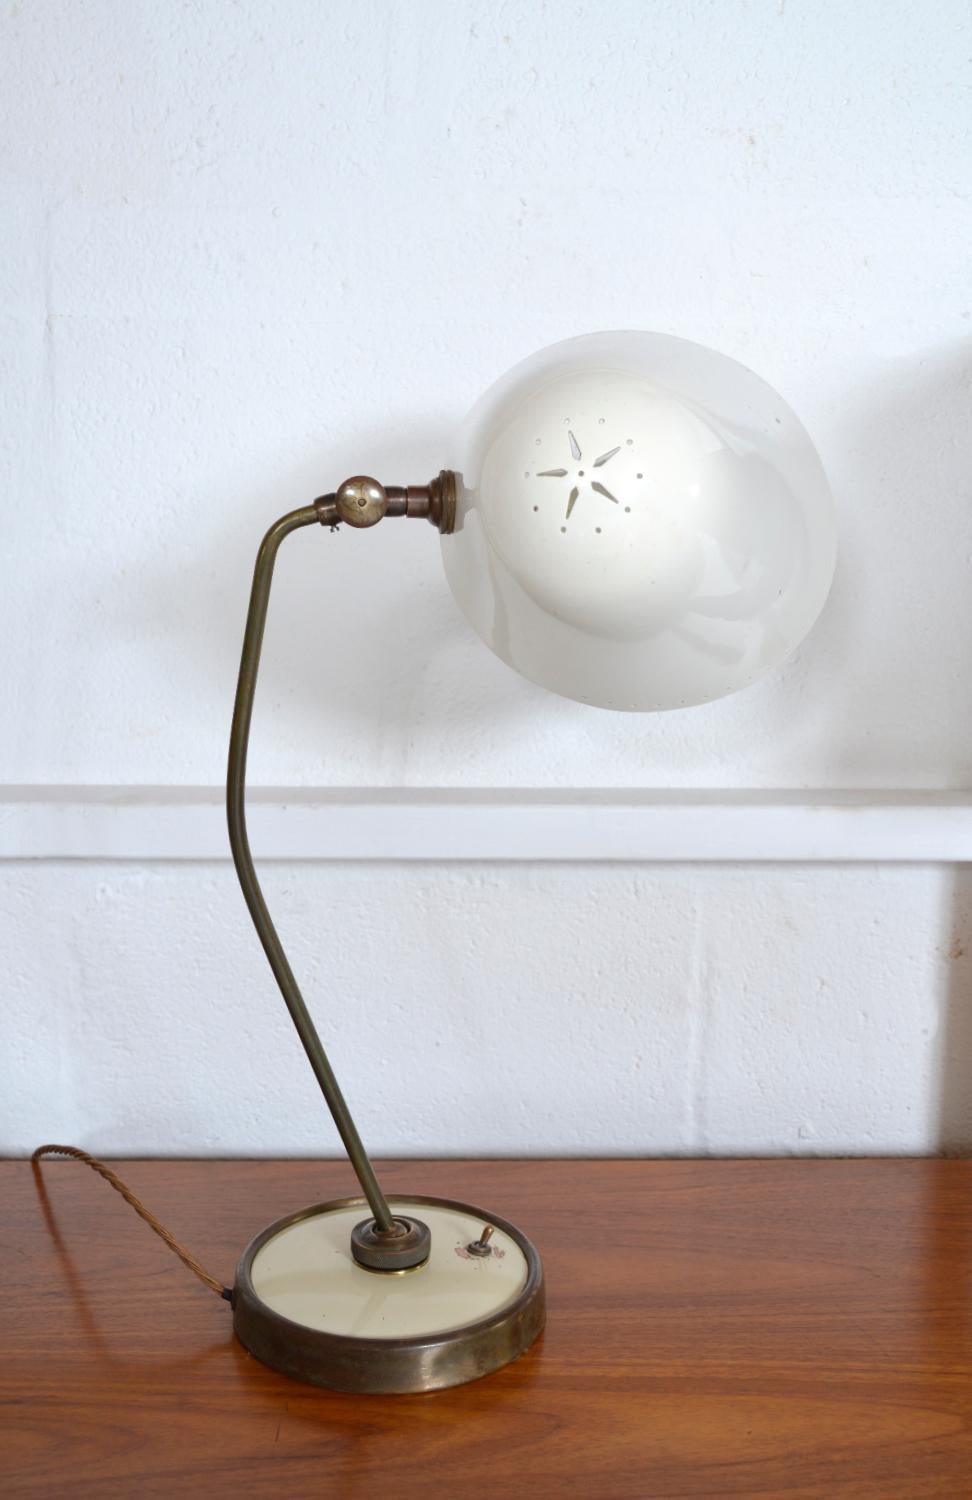 Aluminum Midcentury Versalite Desk Lamp by A B Read for Troughton & Young Postwar British